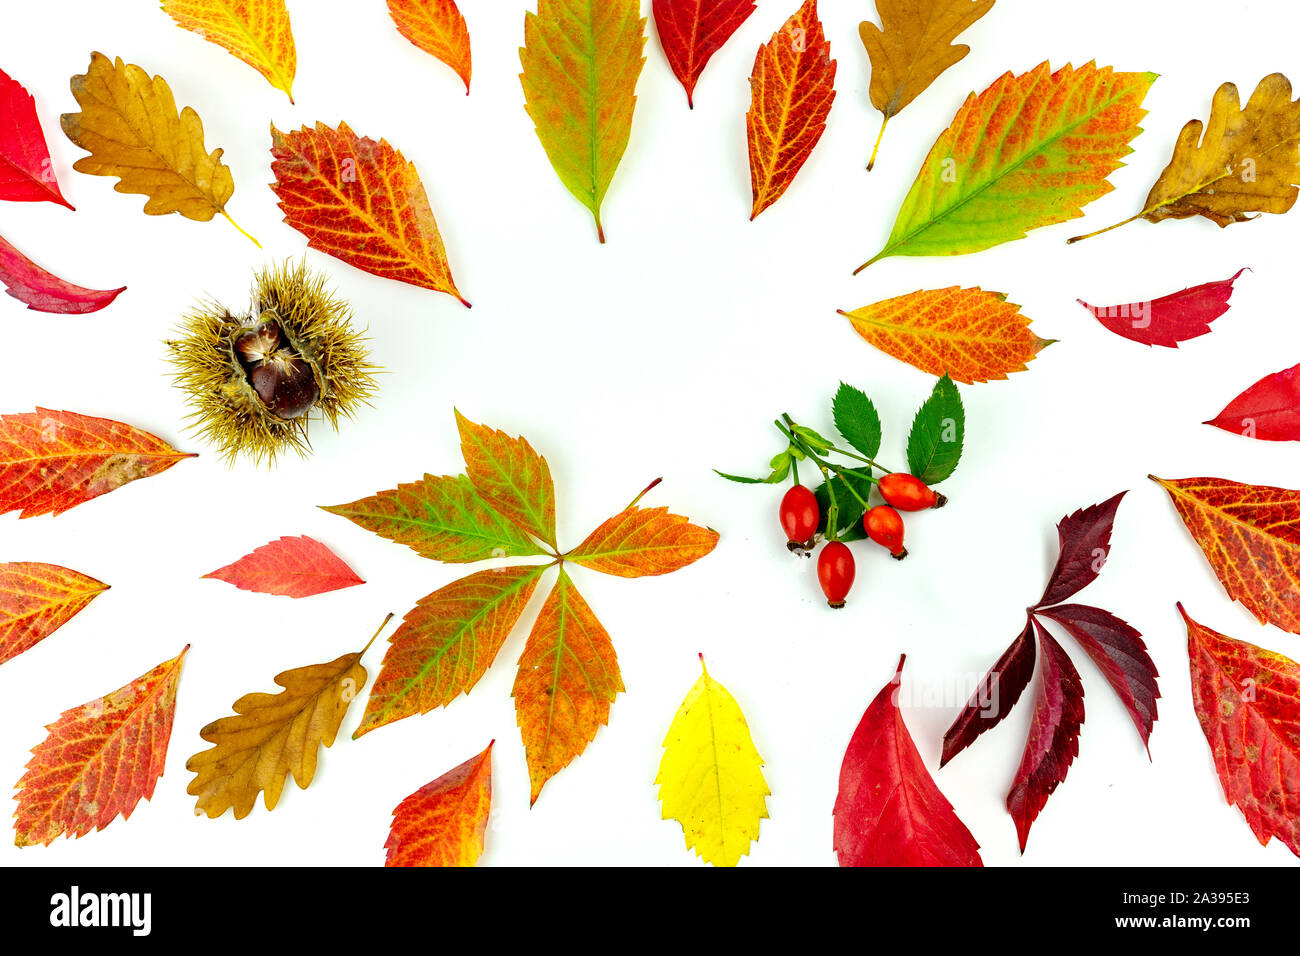 colorful autumn leaves and yields pattern isolated on white background. flat lay, overhead view Stock Photo